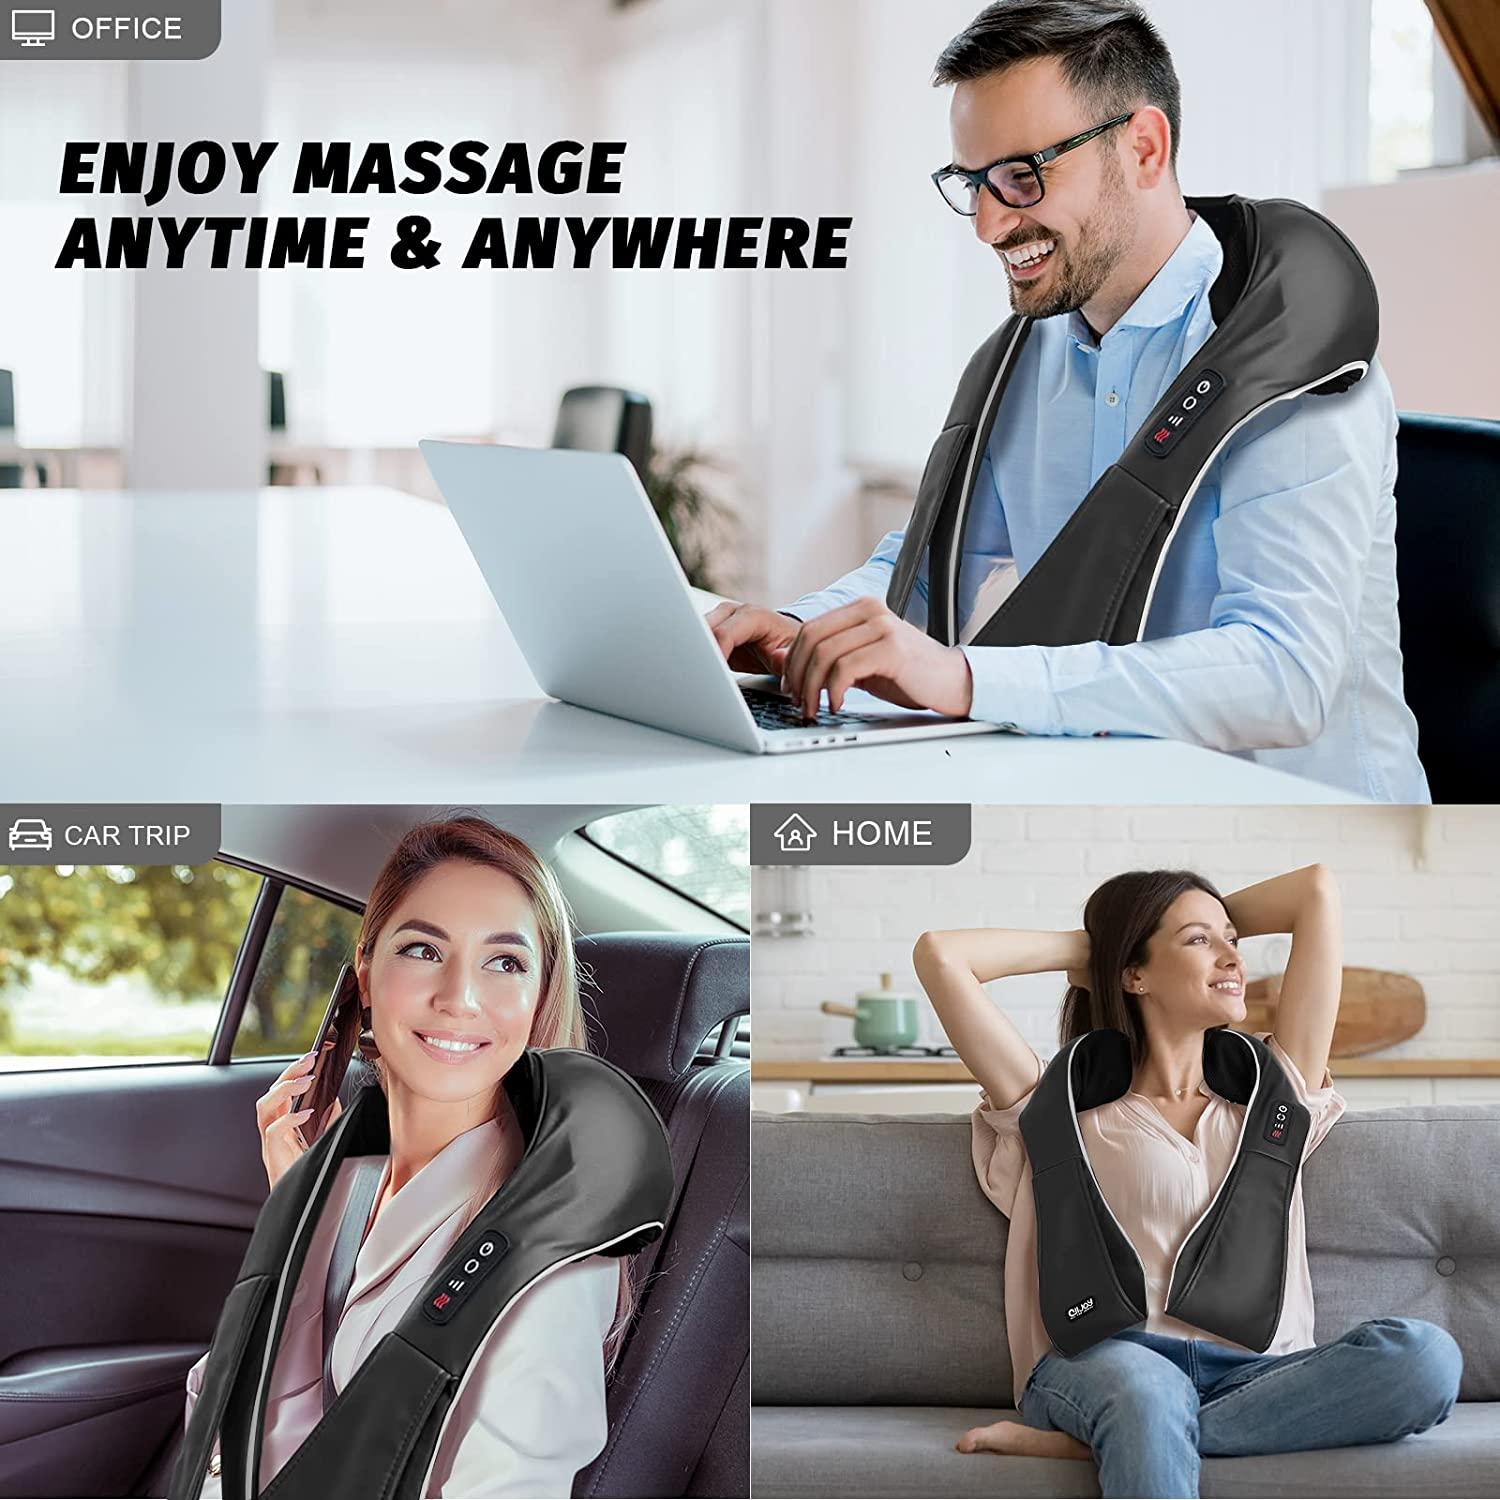 This Shiatsu Massage Pillow is Amazing for Neck & Shoulders!